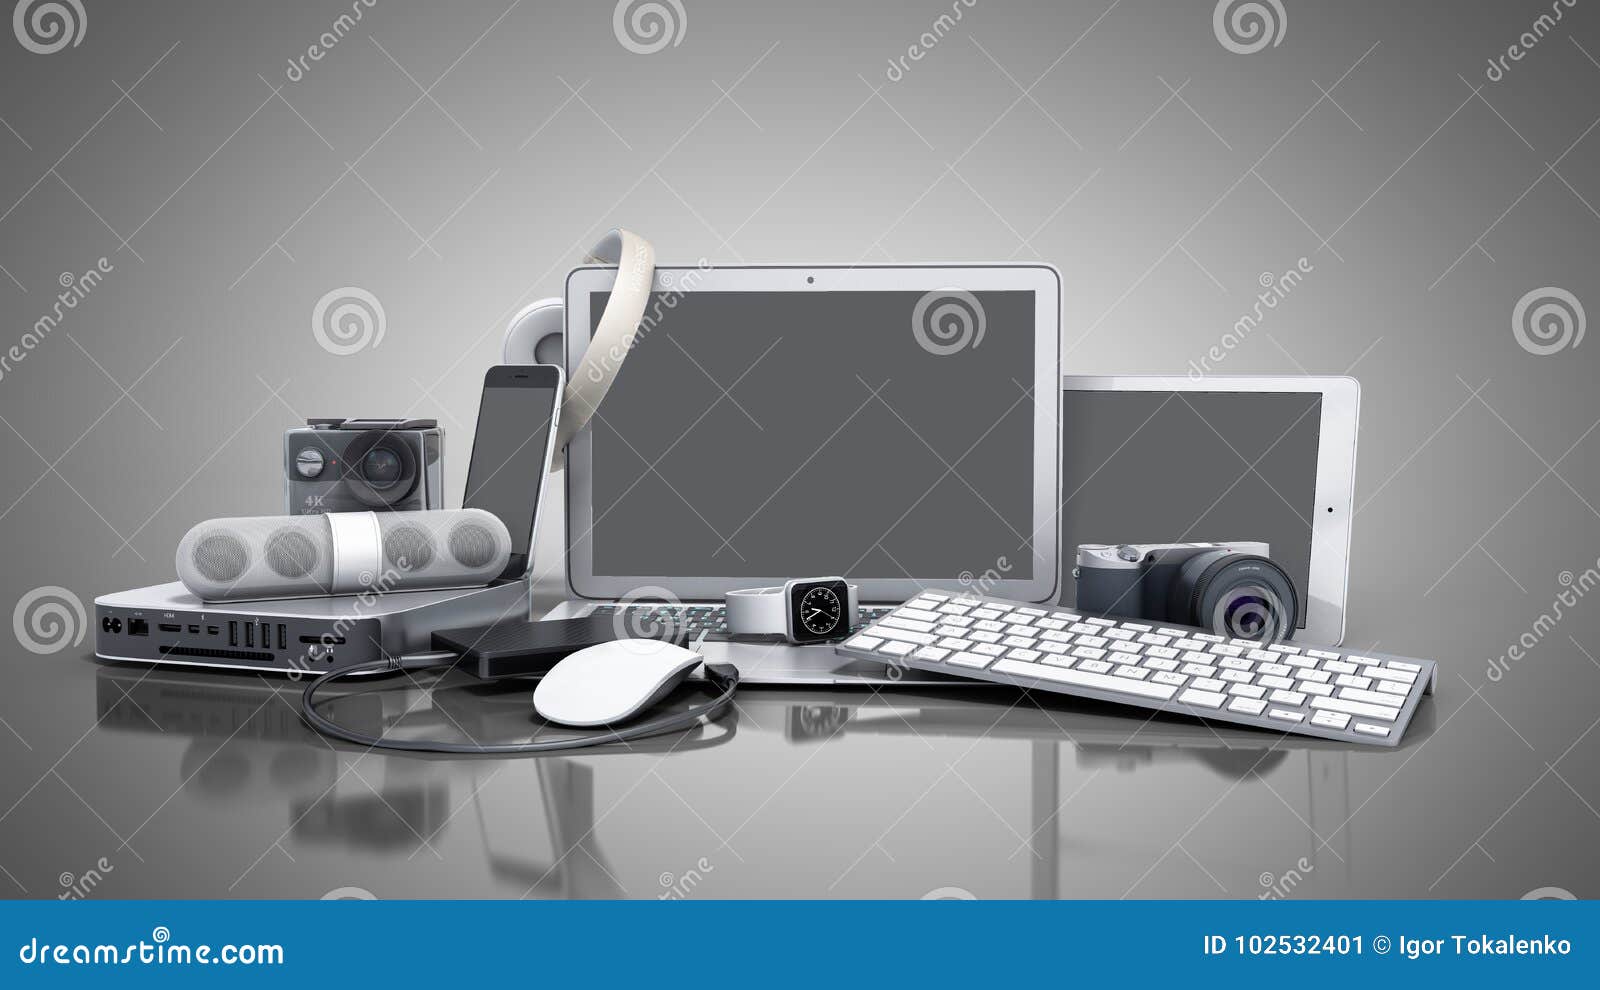 collection of consumer electronics 3d render on grey background